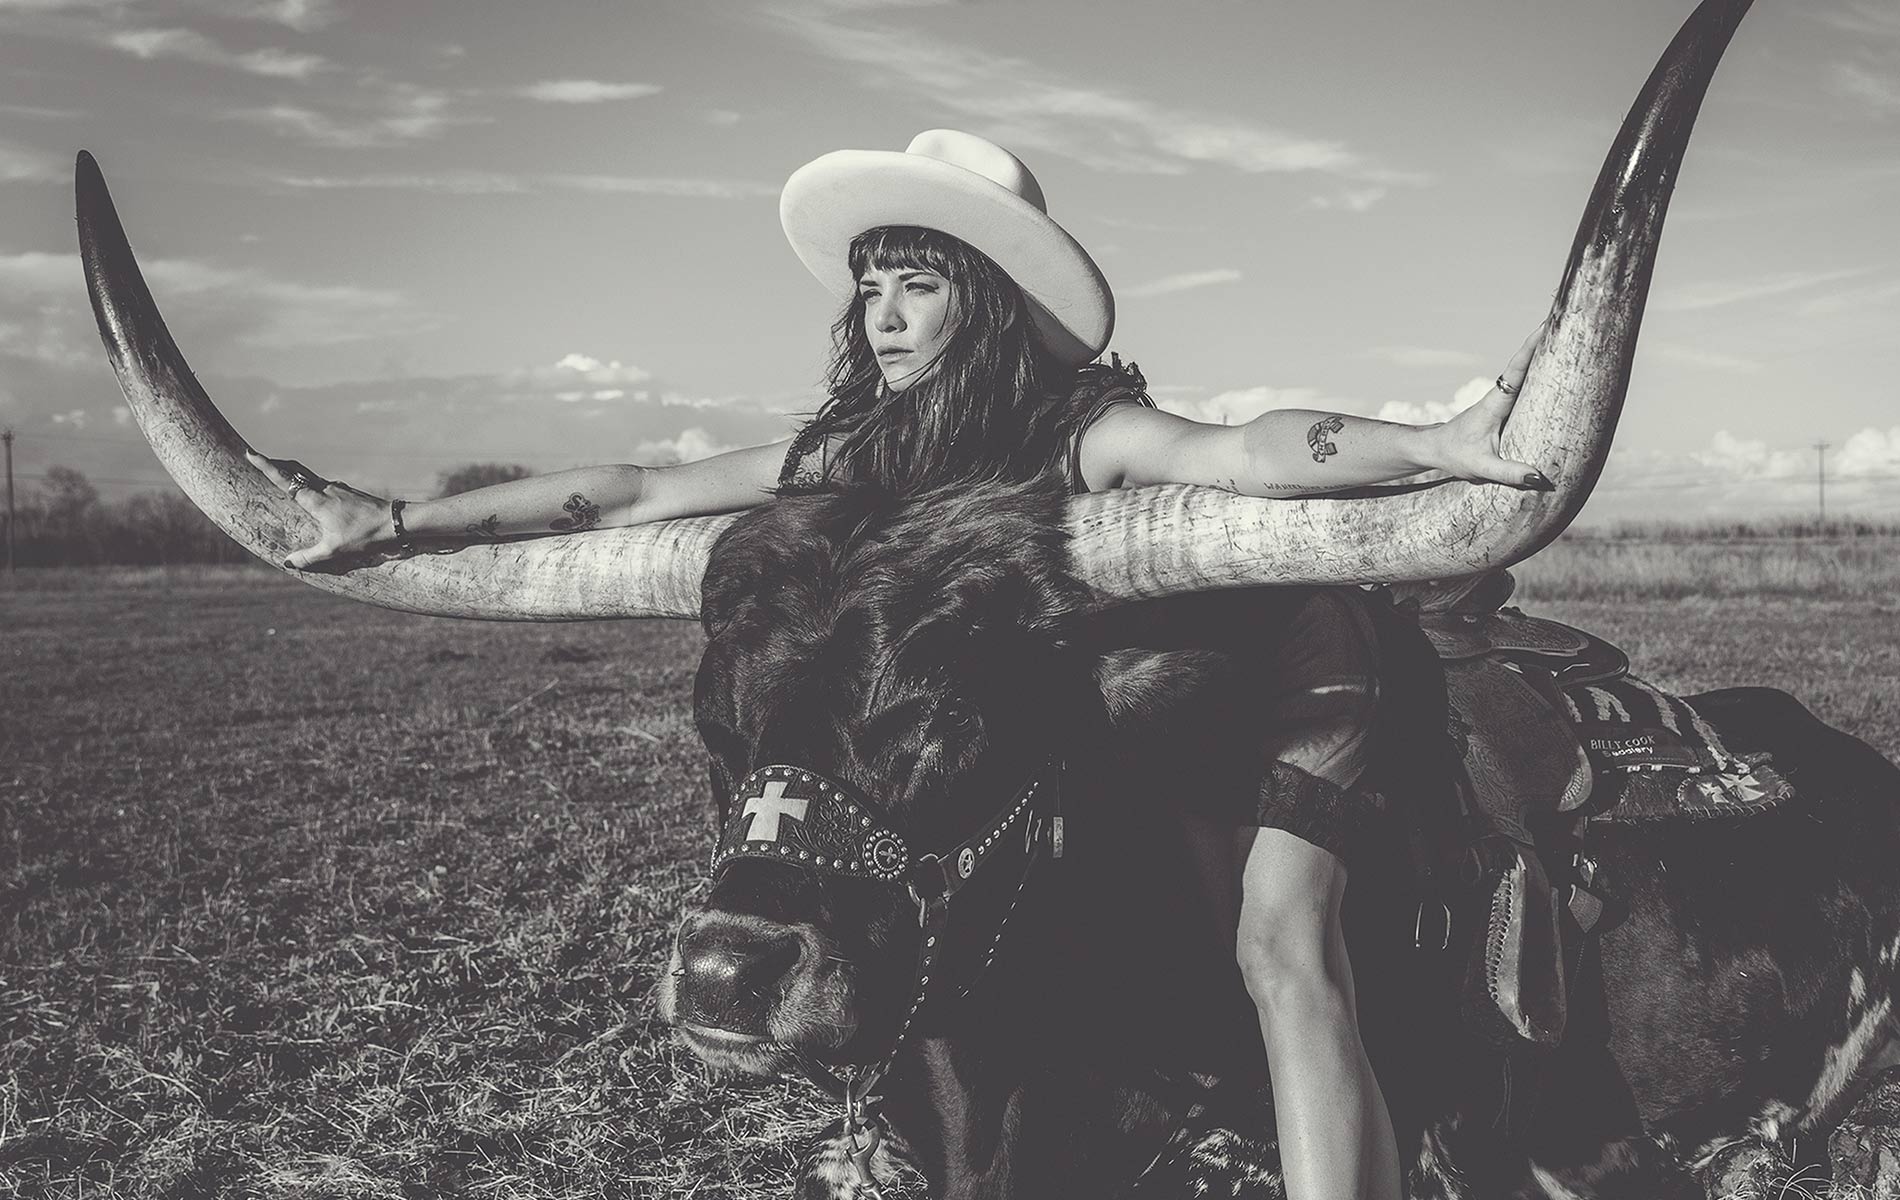 Nikki Lane brings an edgy, rock ’n’ roll vibe to the country music genre. Photo by Eden Tyler